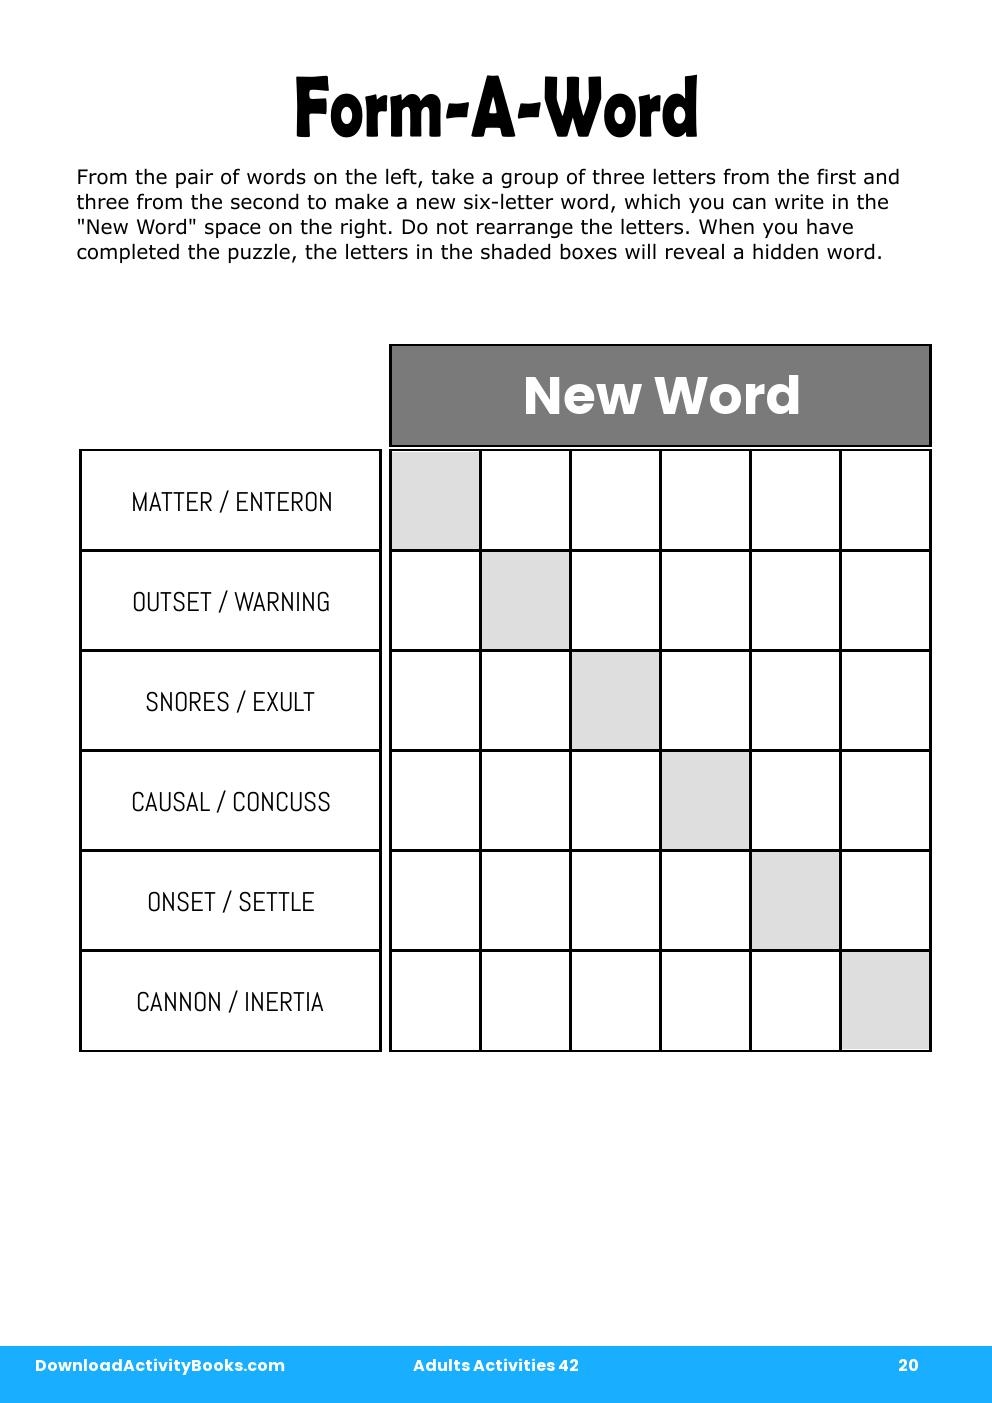 Form-A-Word in Adults Activities 42